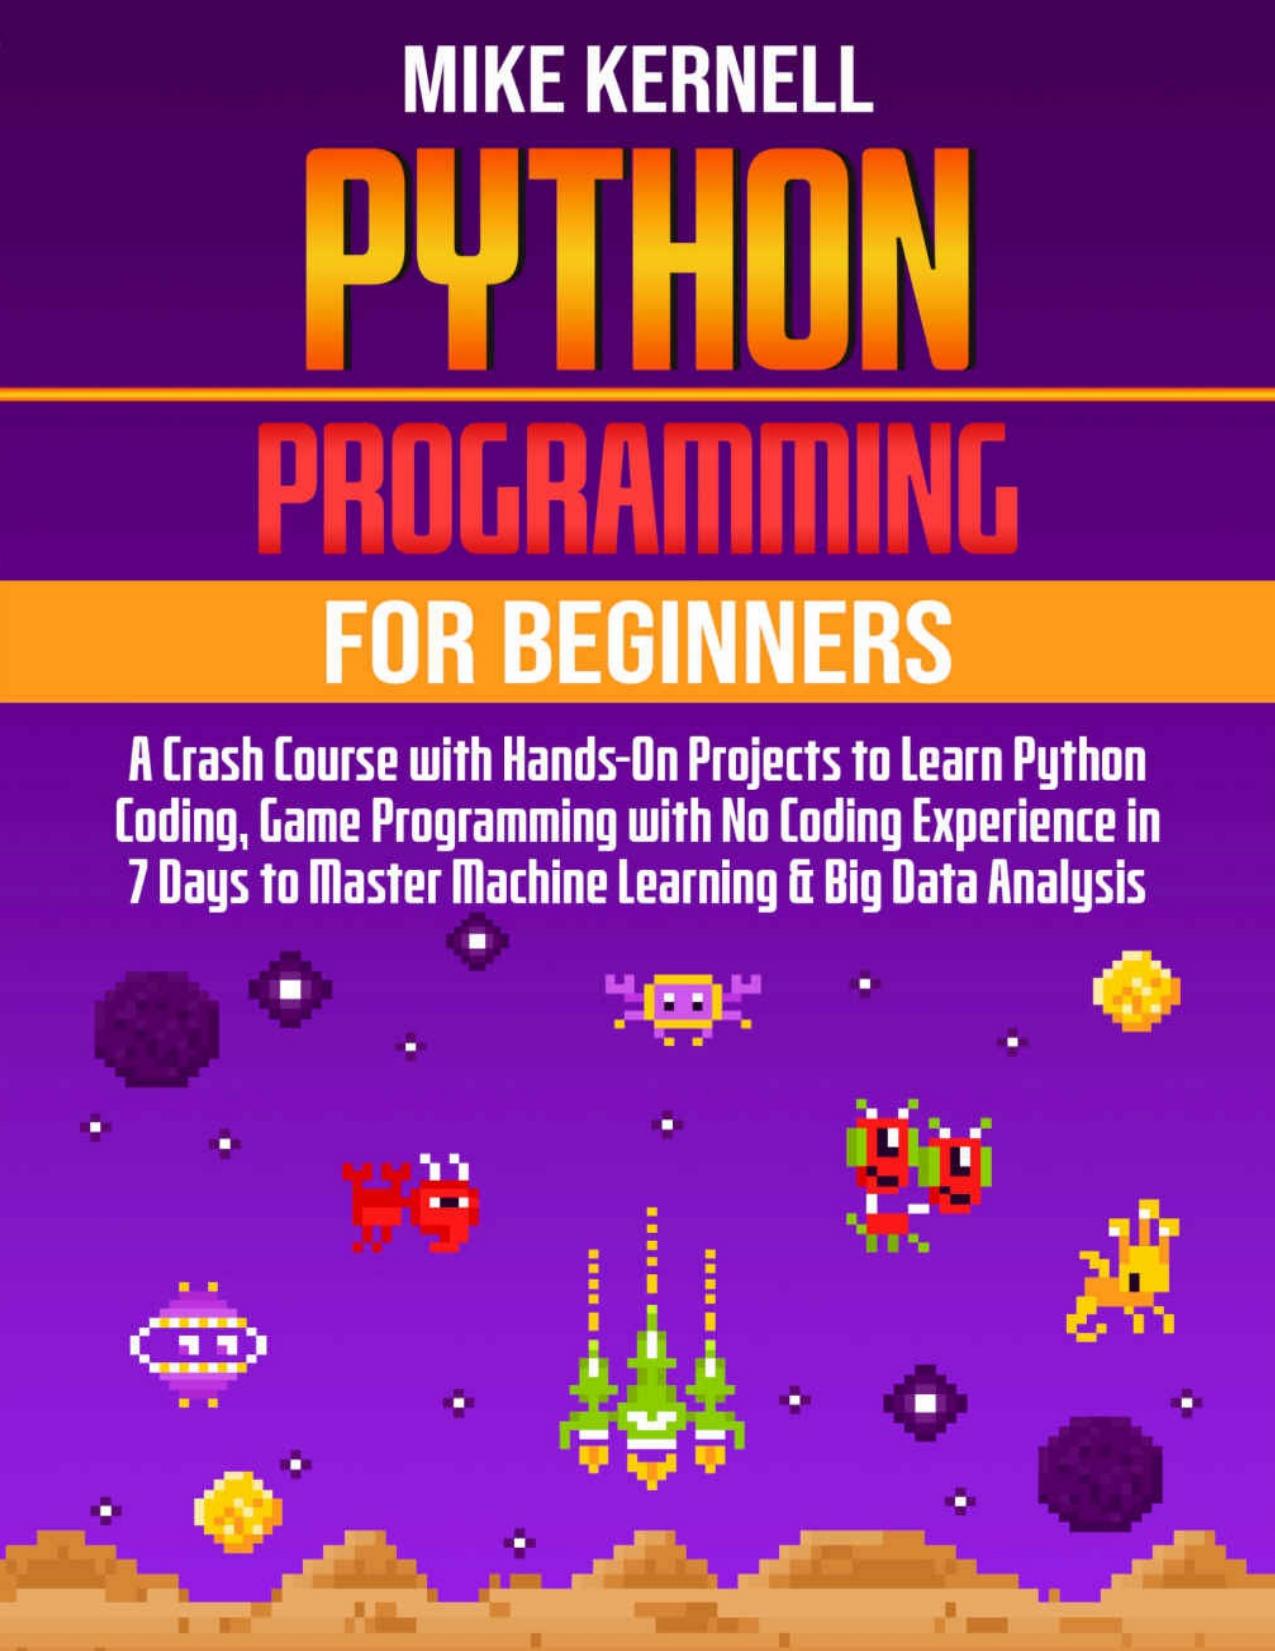 Python Programming for Beginners: A Crash Course with Hands-On Projects to Learn Python Coding, Game Programming with No Coding Experience In 7 Days To Master Machine Learning & Big Data Analysis